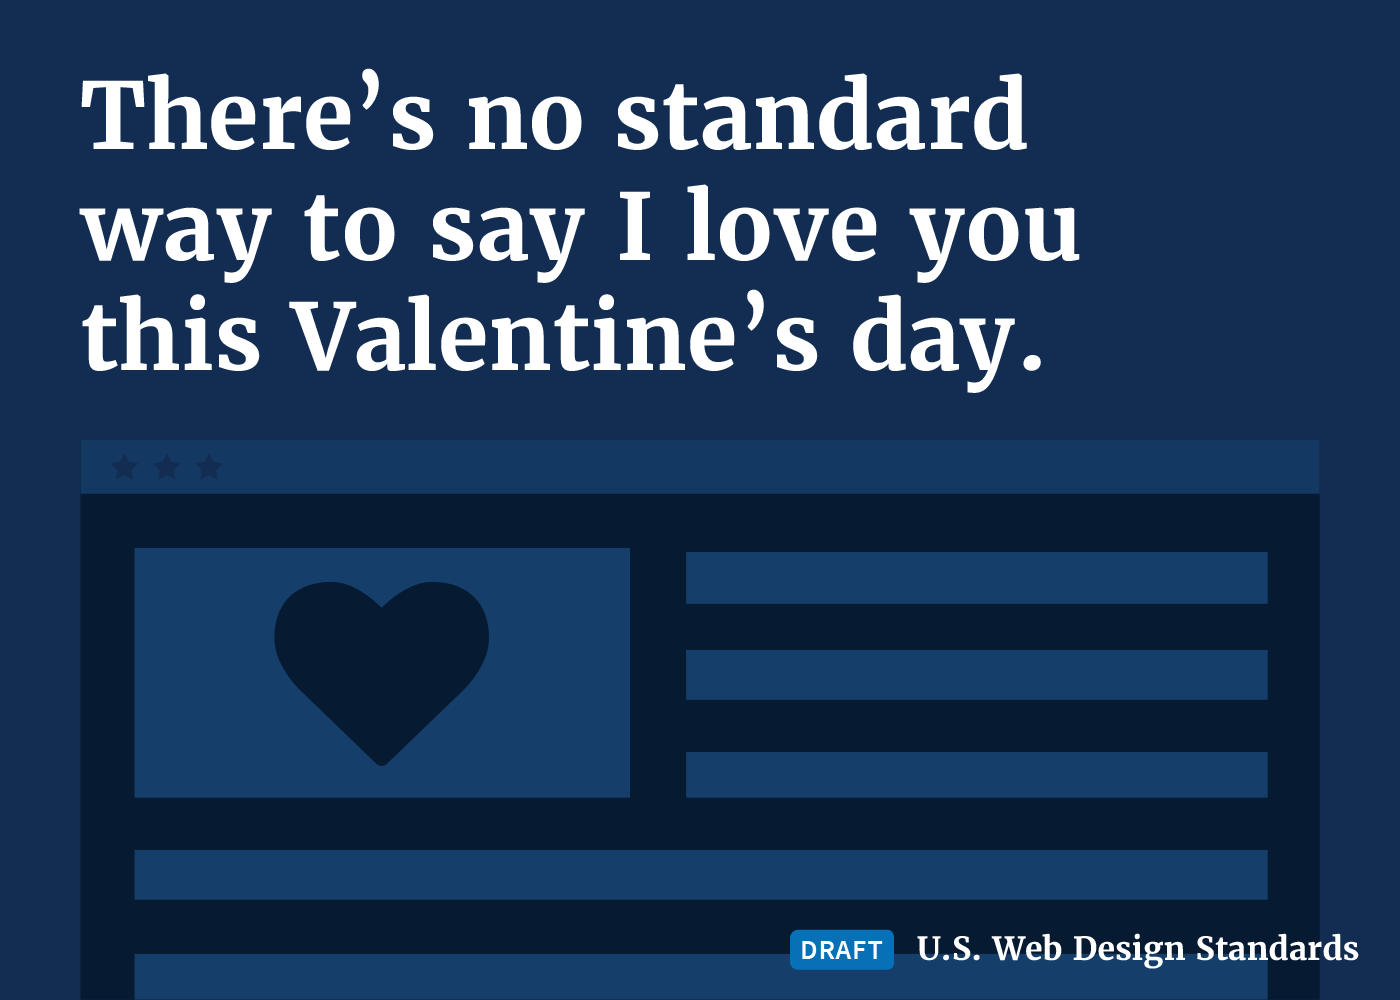 A valentines message floating above the draft web standards logo.